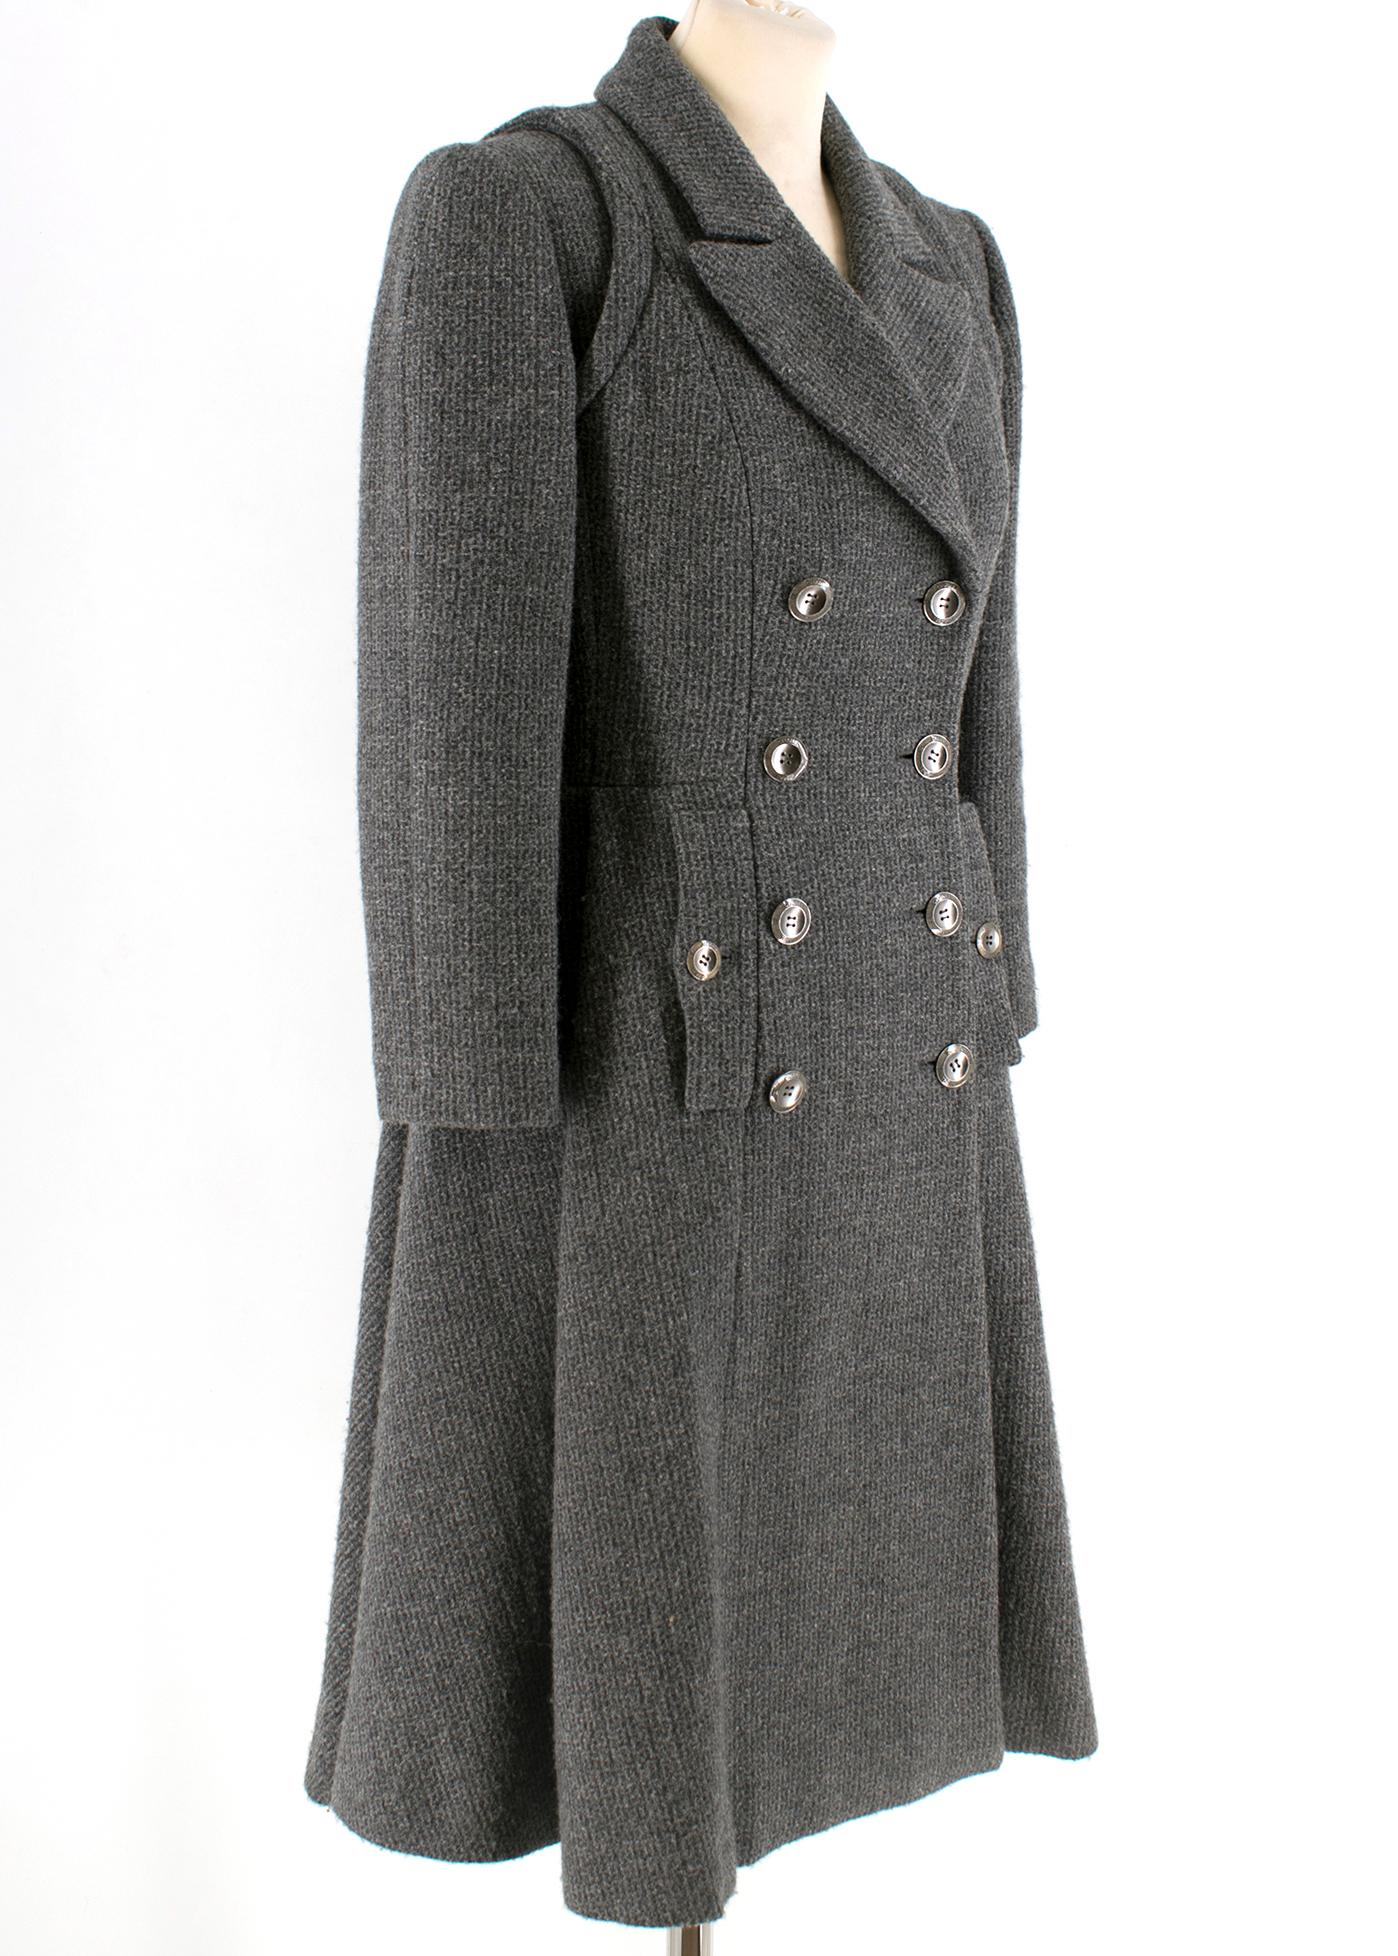 Chanel Runway Grey Wool & Cashmere Coat

- Grey knit long coat 
-  100% silk lining 
- Side buttoned pockets 
- Silver hardware 

Please note, these items are pre-owned and may show signs of being stored even when unworn and unused. This is